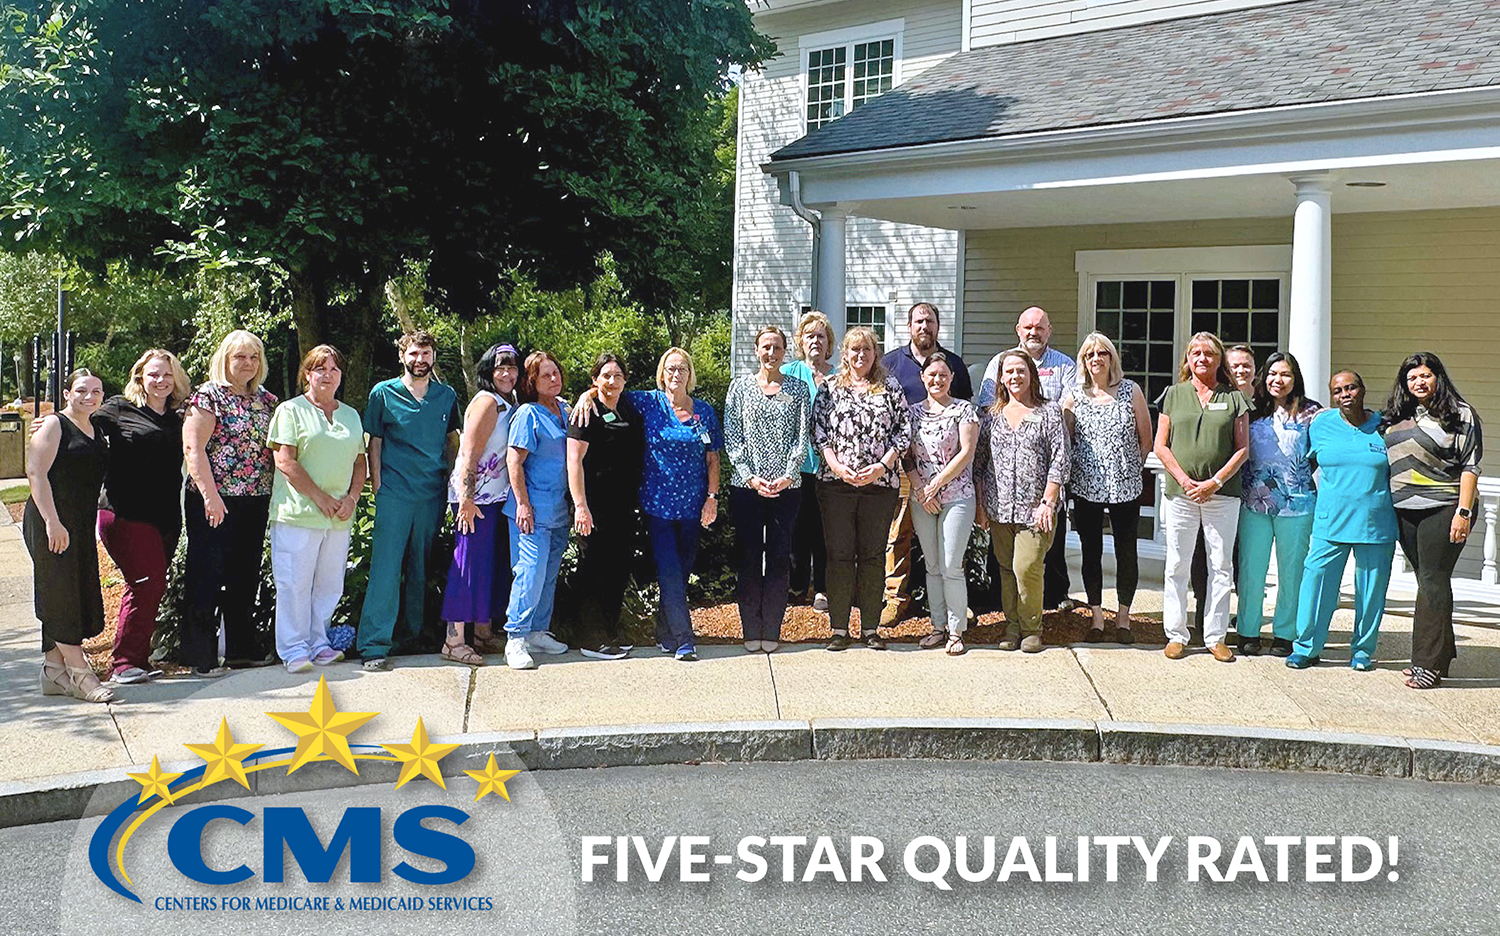 Masconomet Healthcare Center Team Earns a Five-Star Rating from the Centers for Medicare & Medicaid Services.